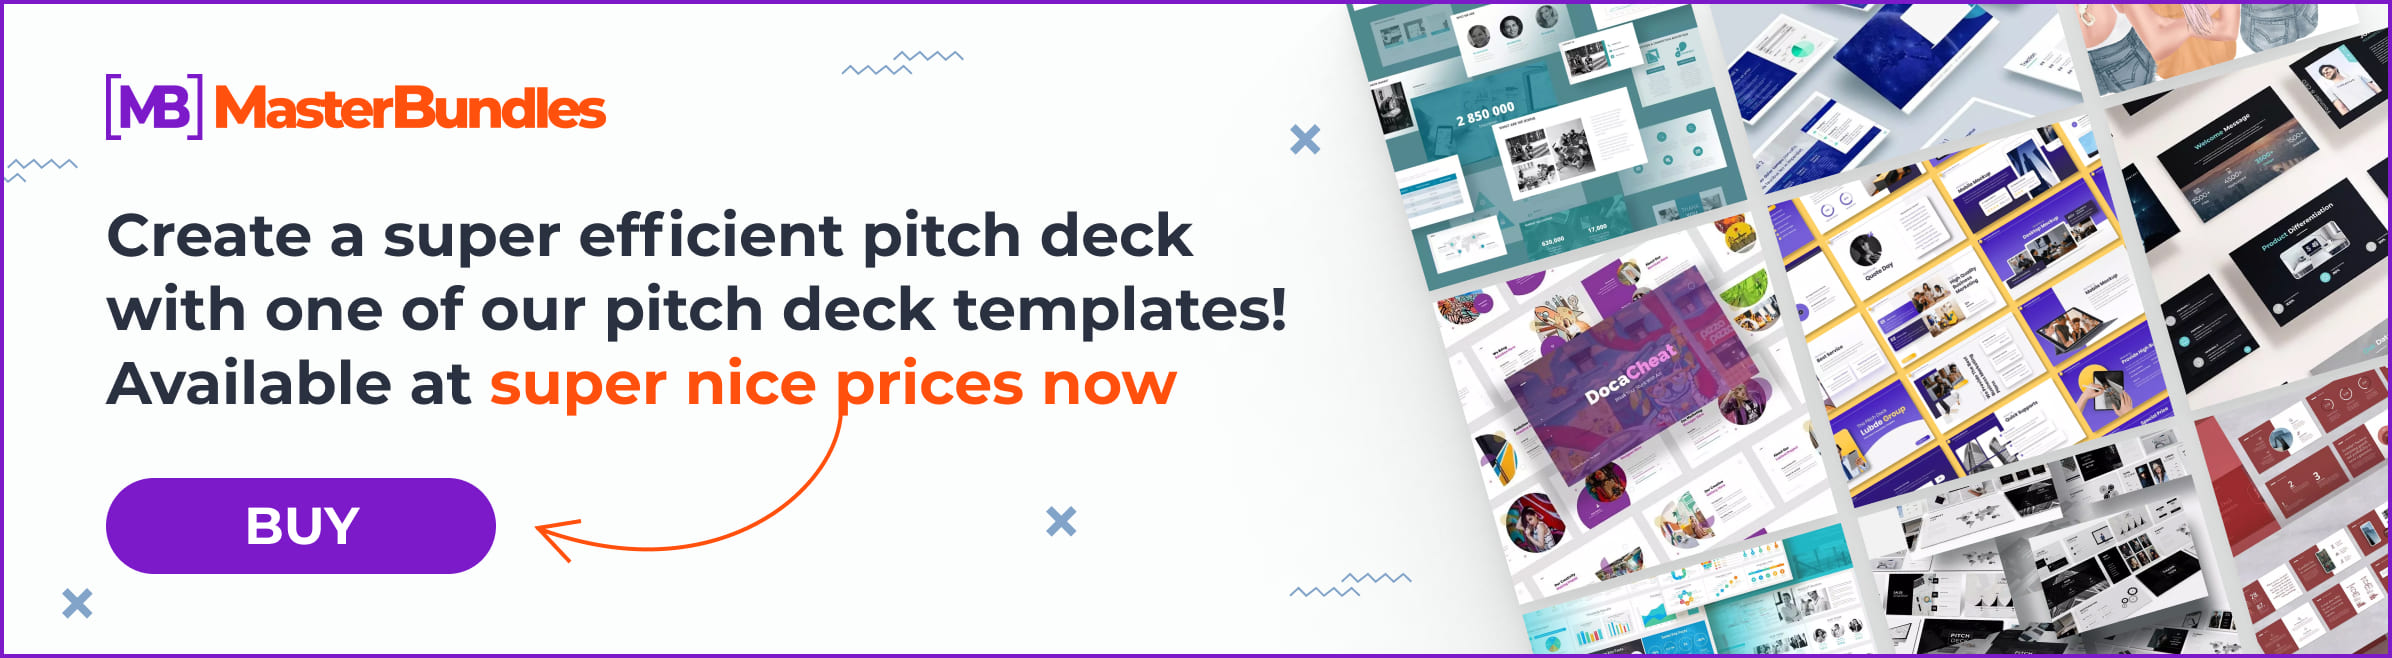 Banner for pitch deck templates with discount.